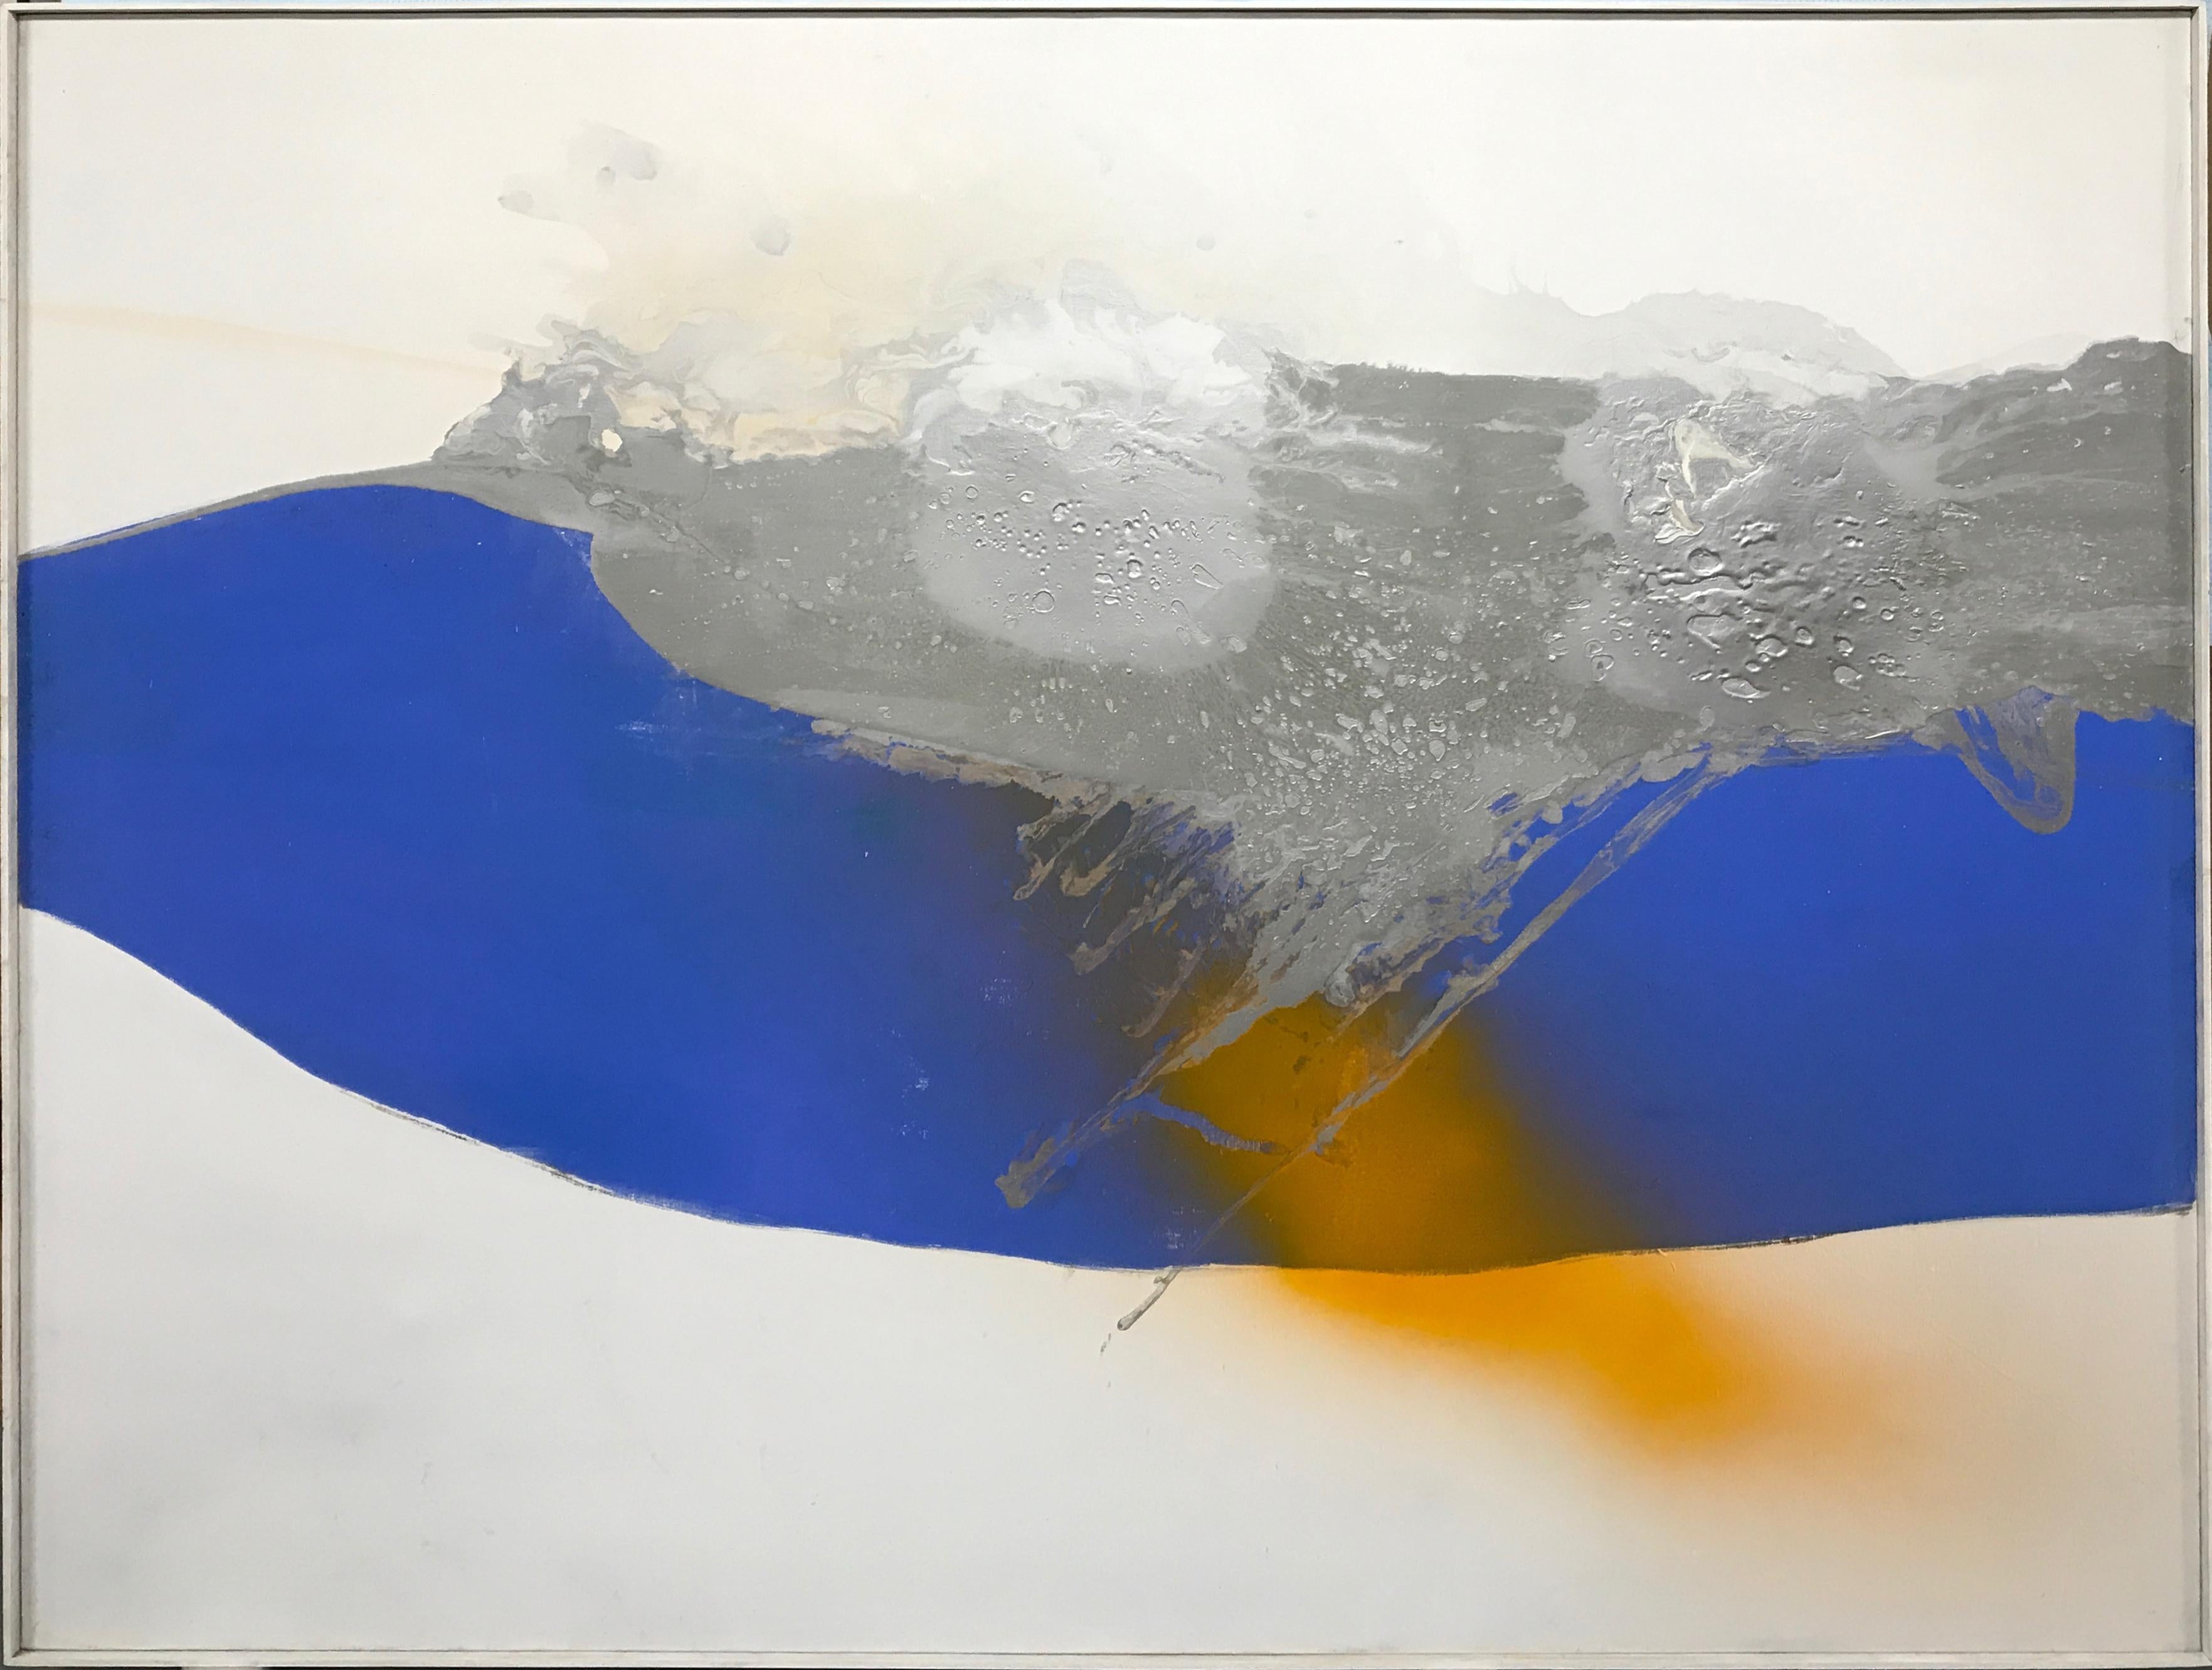 Artist: Cleve Gray, American (1918 - 2004)
Title: Blue Stream
Year: 1971
Medium: Liquitex on Liquitex Gesso with Aluminum paint on canvas, signed verso
Size: 82 x 101 in. (208.28 x 256.54 cm)